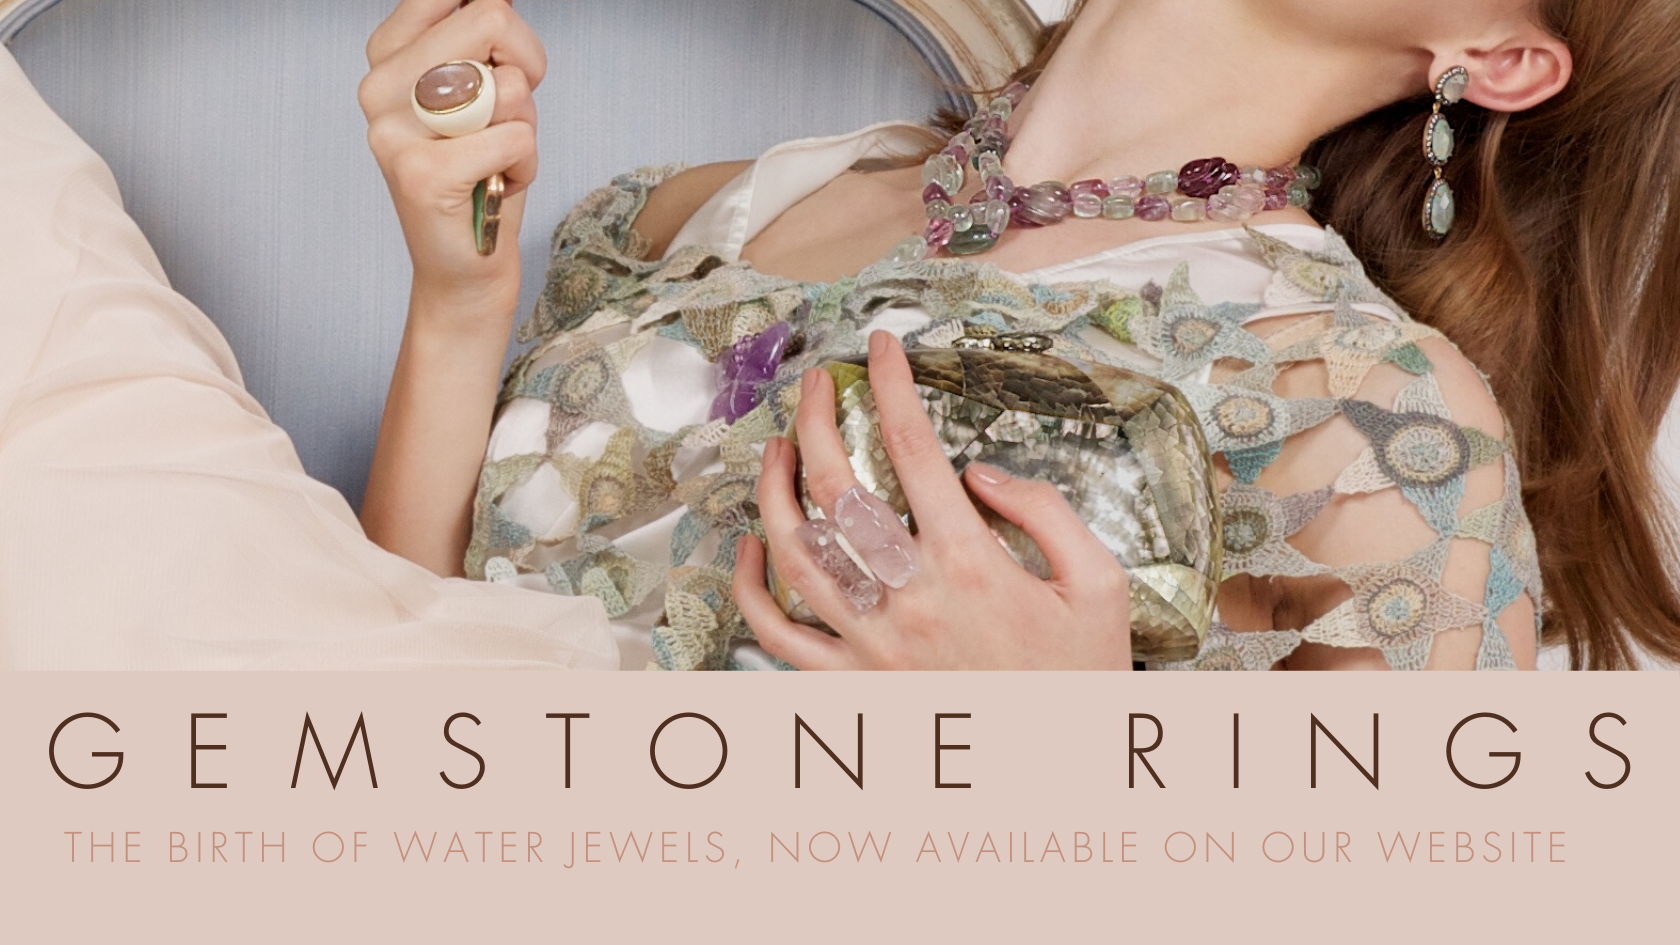 Gemstone Rings: The Birth of Water Jewels